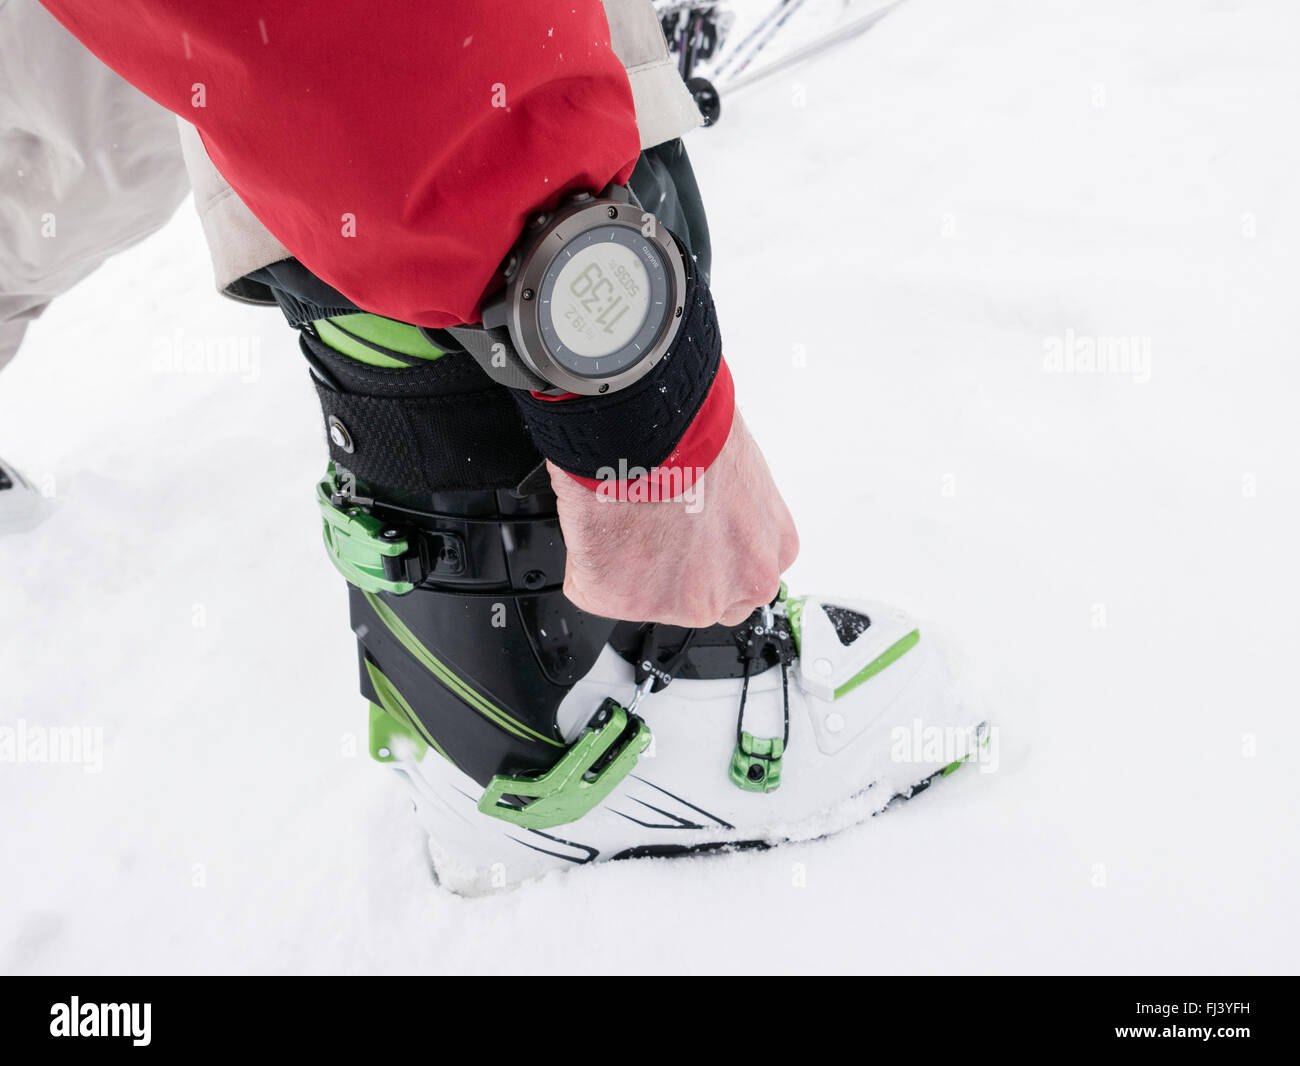 Skier adjusting alpine touring ski boots and wearing a Suunto Traverse GPS Watch device for backcountry navigation. Alps Stock Photo